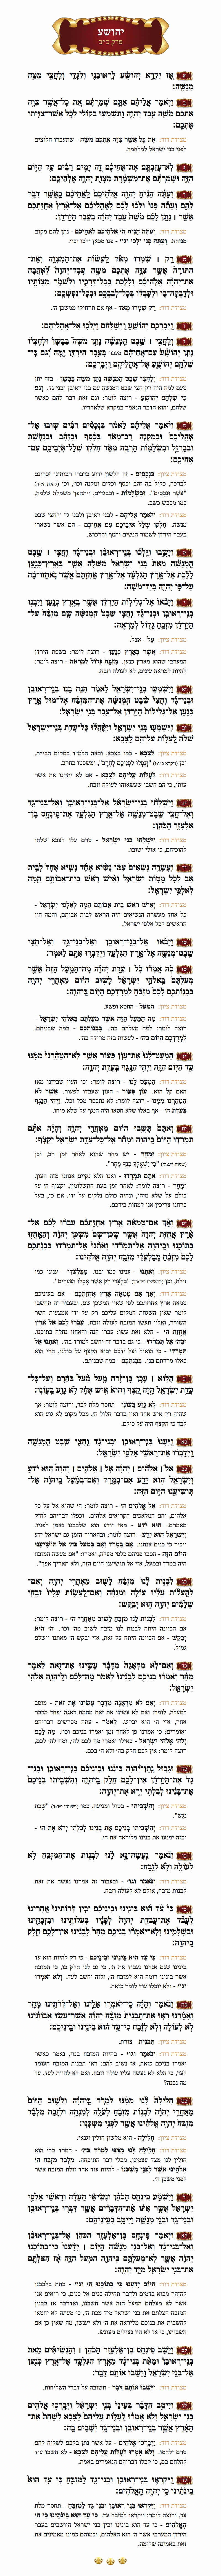 Sefer Yehoshua Chapter 22 with commentary